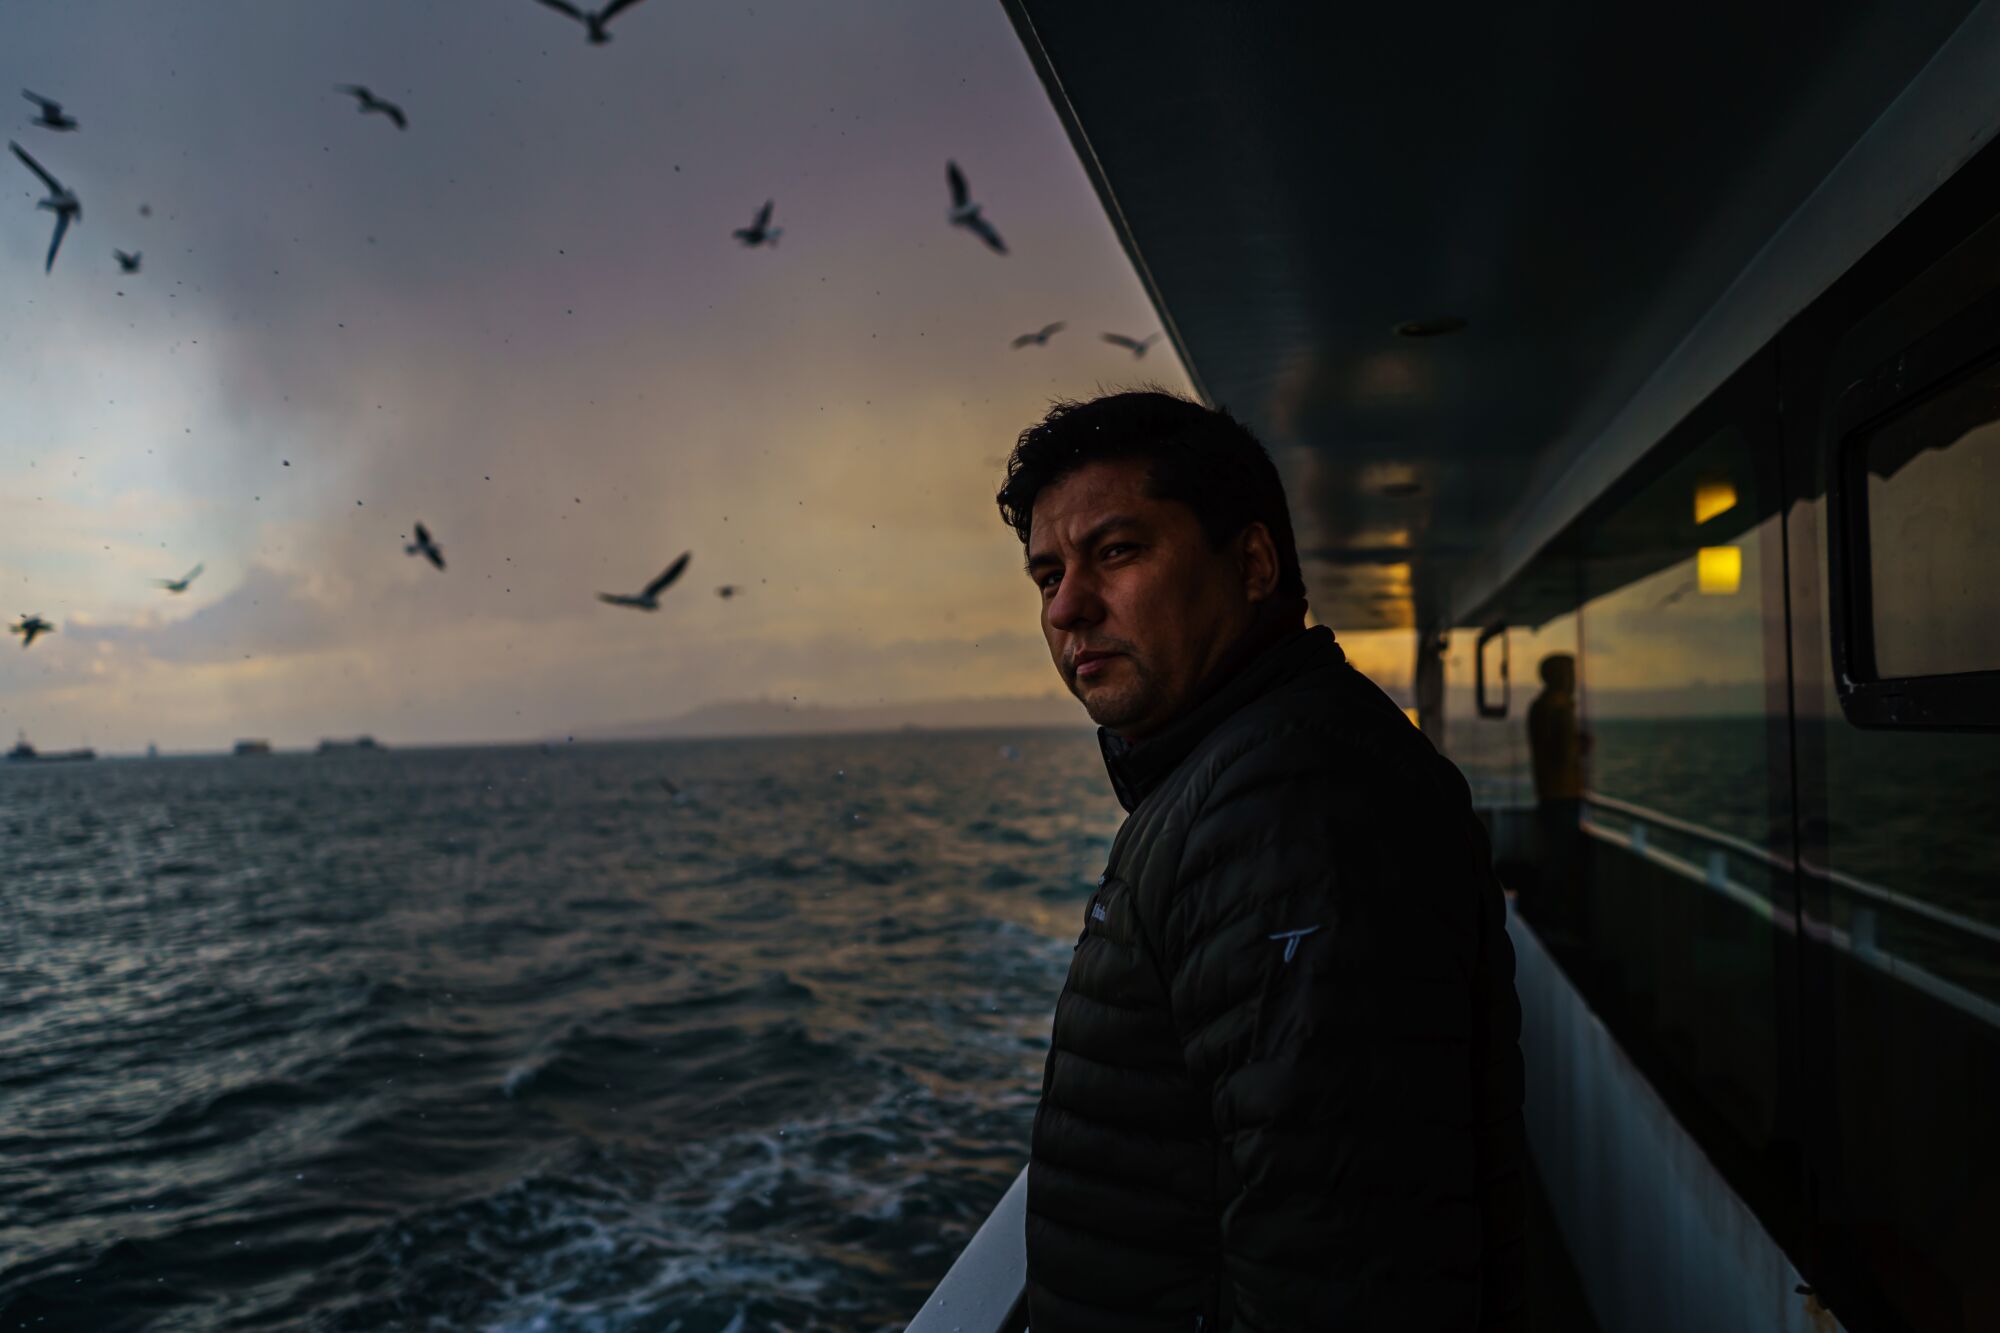 A man stands near a ferry railing looking at a choppy sea. Gulls fly in the background.